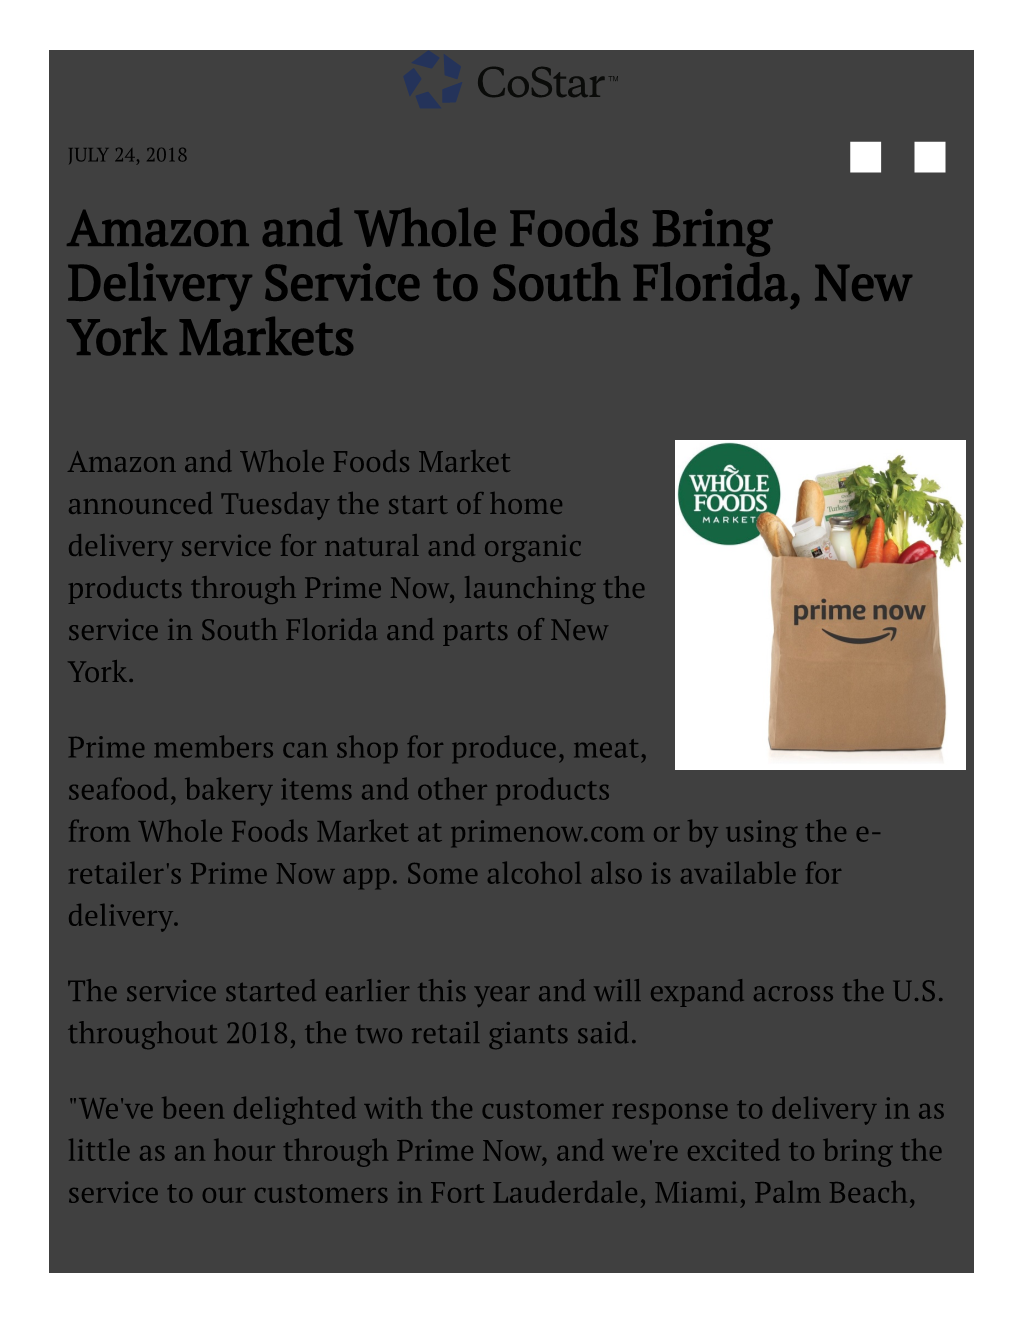 Amazon and Whole Foods Bring Delivery Service to South Florida, New York Markets Retail Giants to Add More Markets Across US in 2018